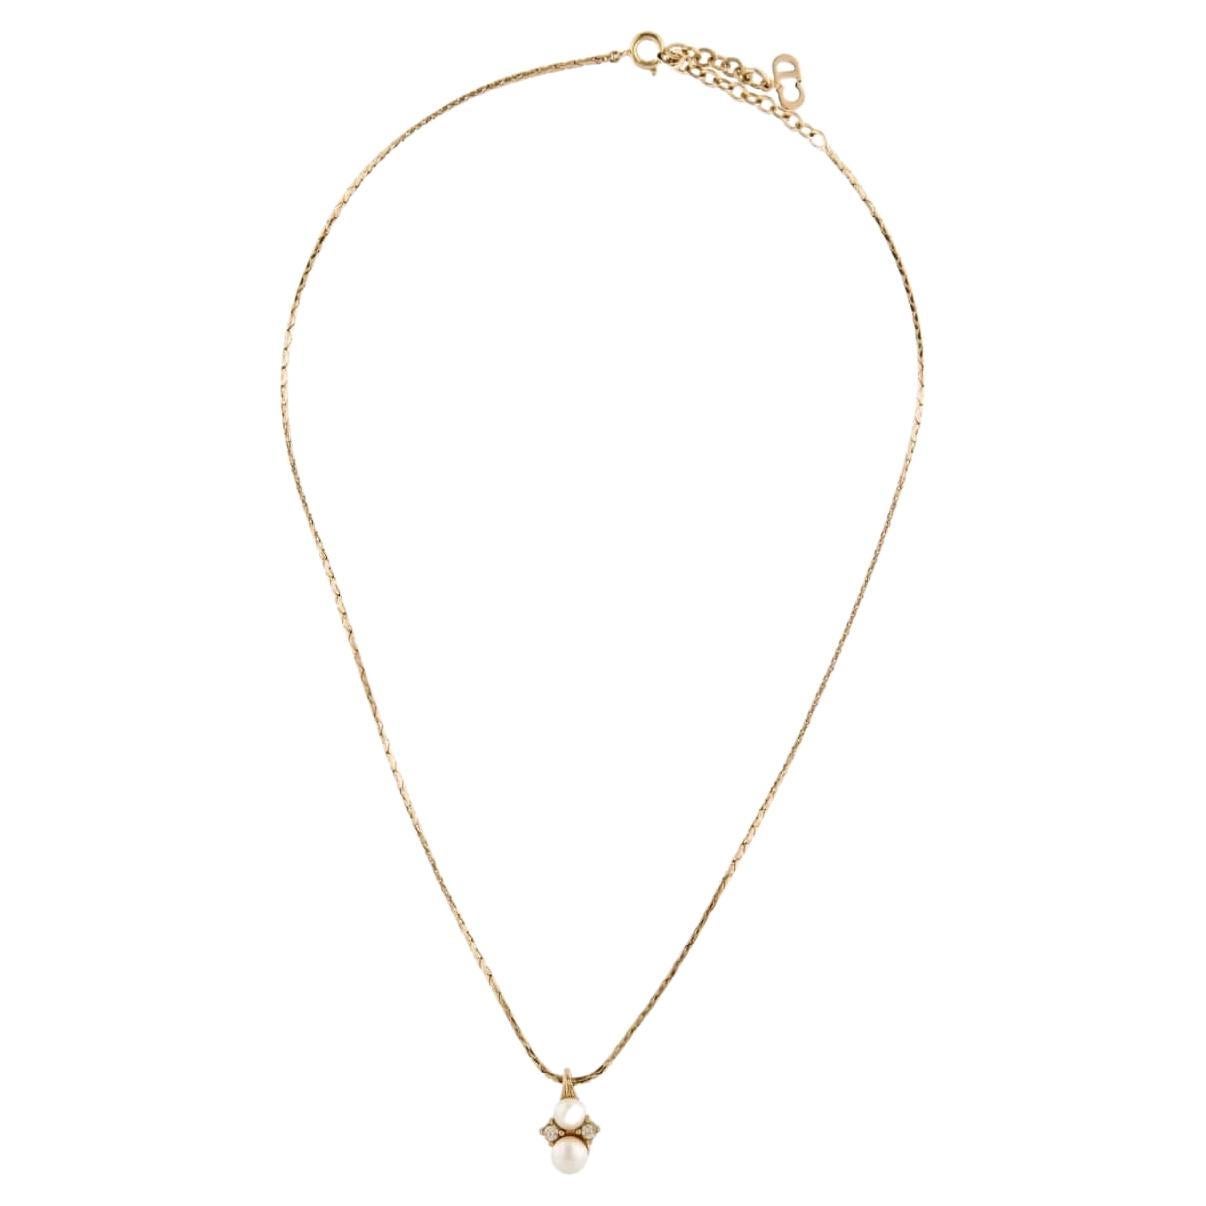 Quintessentially sophisticated, Christian Dior presents this rope chain necklace. Crafted from polished gold-tone metal, the piece is elegantly adorned with faux-pearl and rhinestone embellishments.

Signed at the back. Marked 'Chr.Dior (C) '.

Very